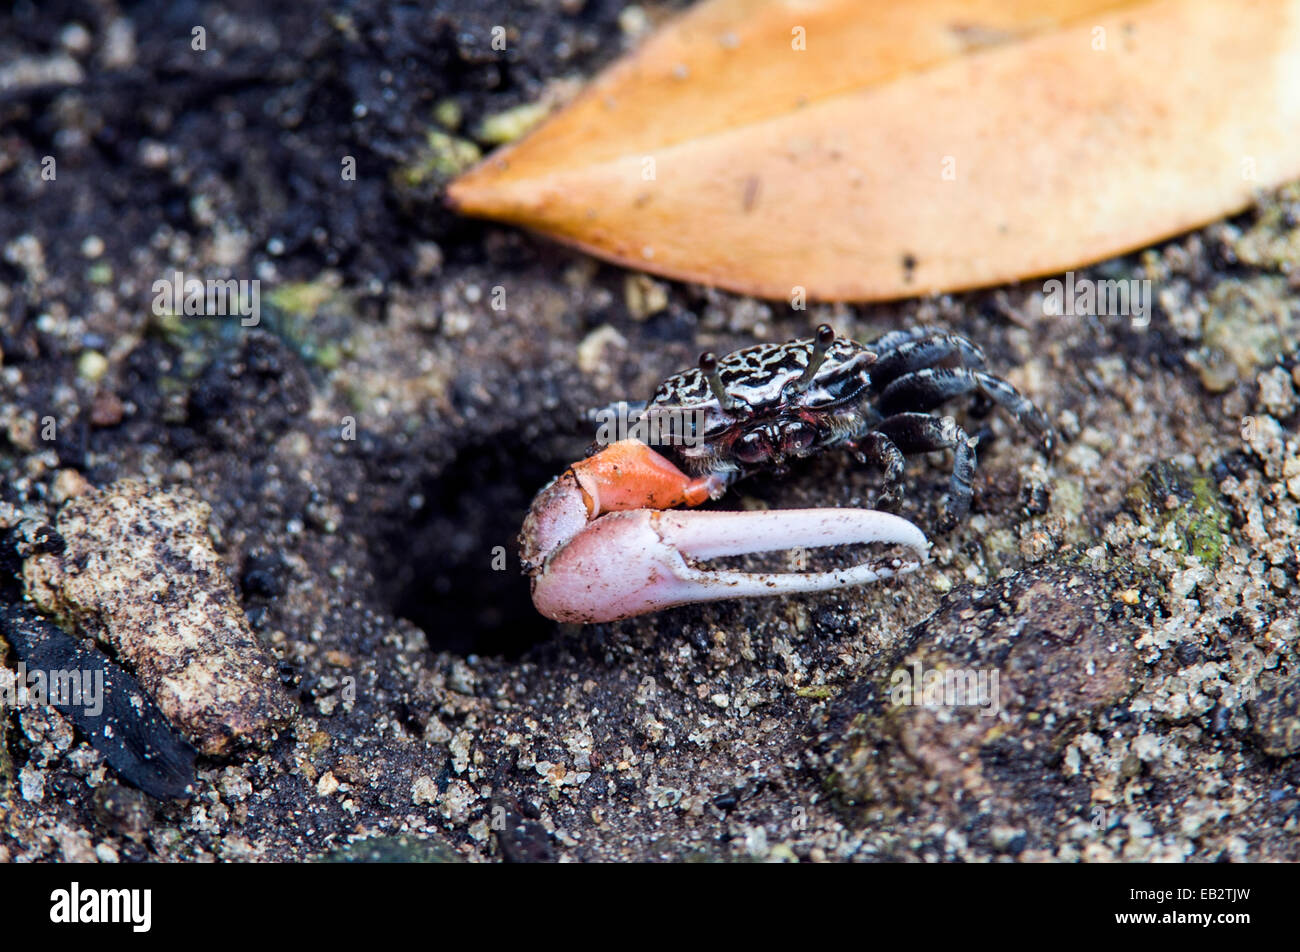 A Fiddler Crab emerges from it's burrow in the mud of a mangrove forest. Stock Photo